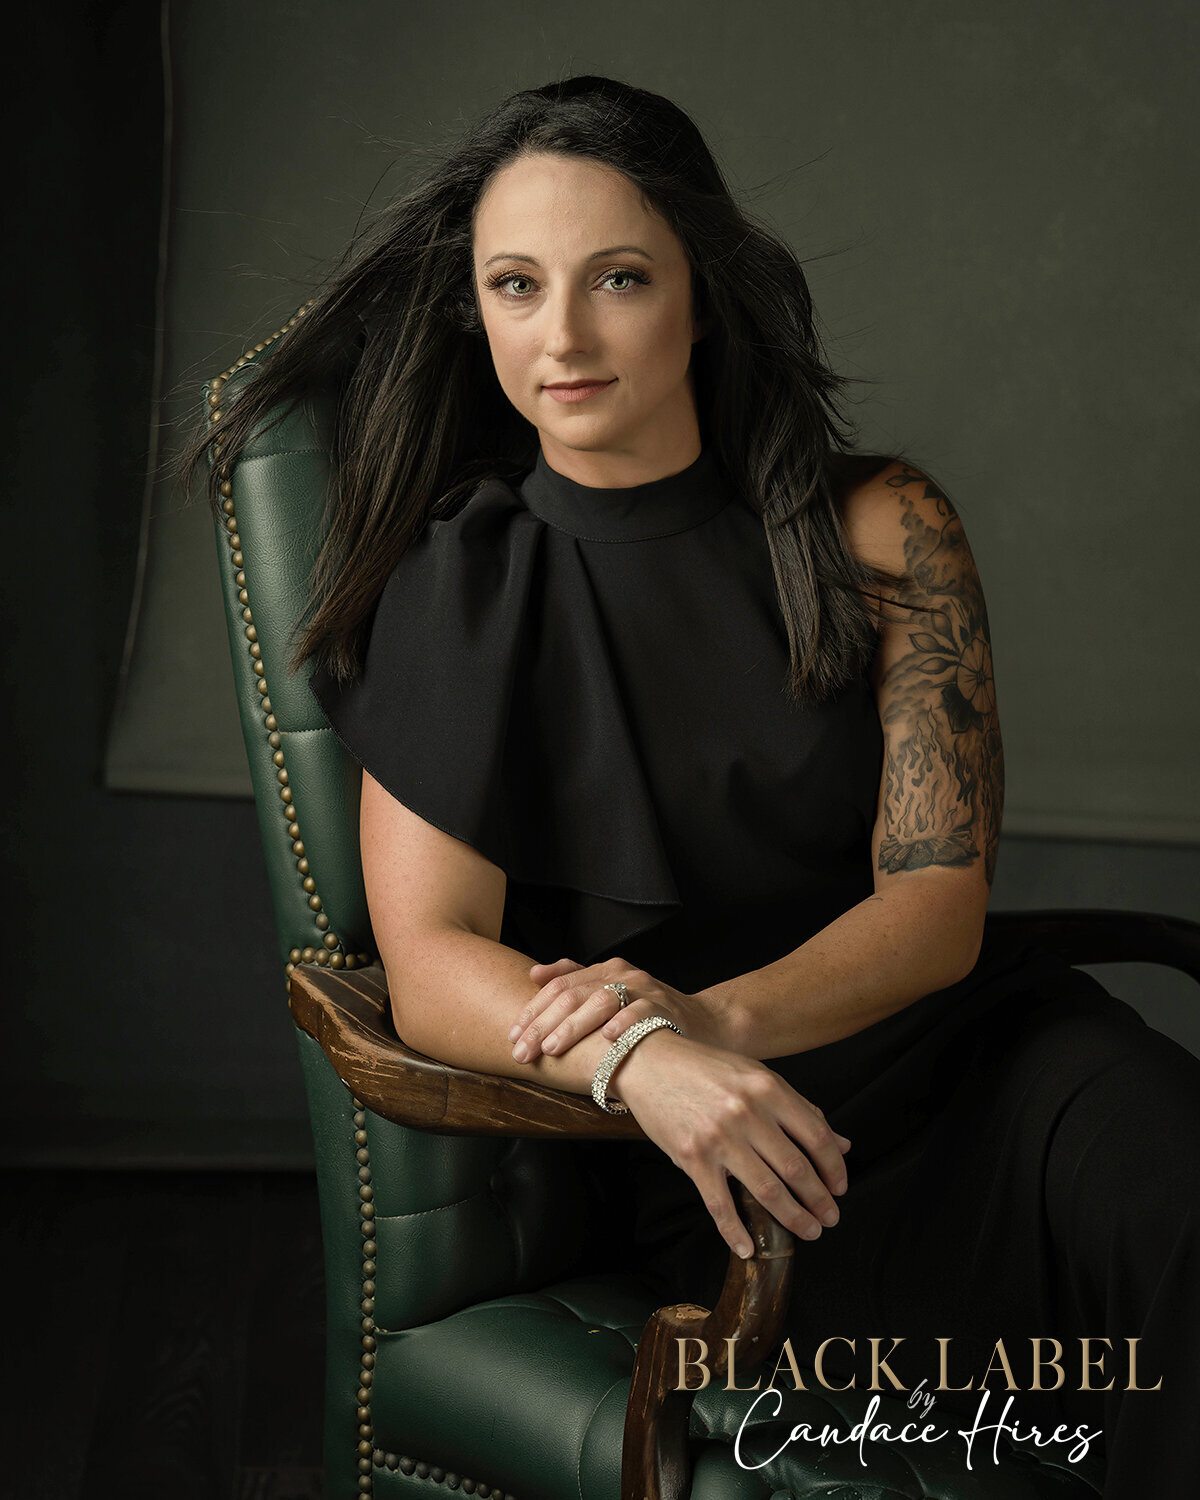 tattooed woman photographed in green leather chair on a black bakcdrops